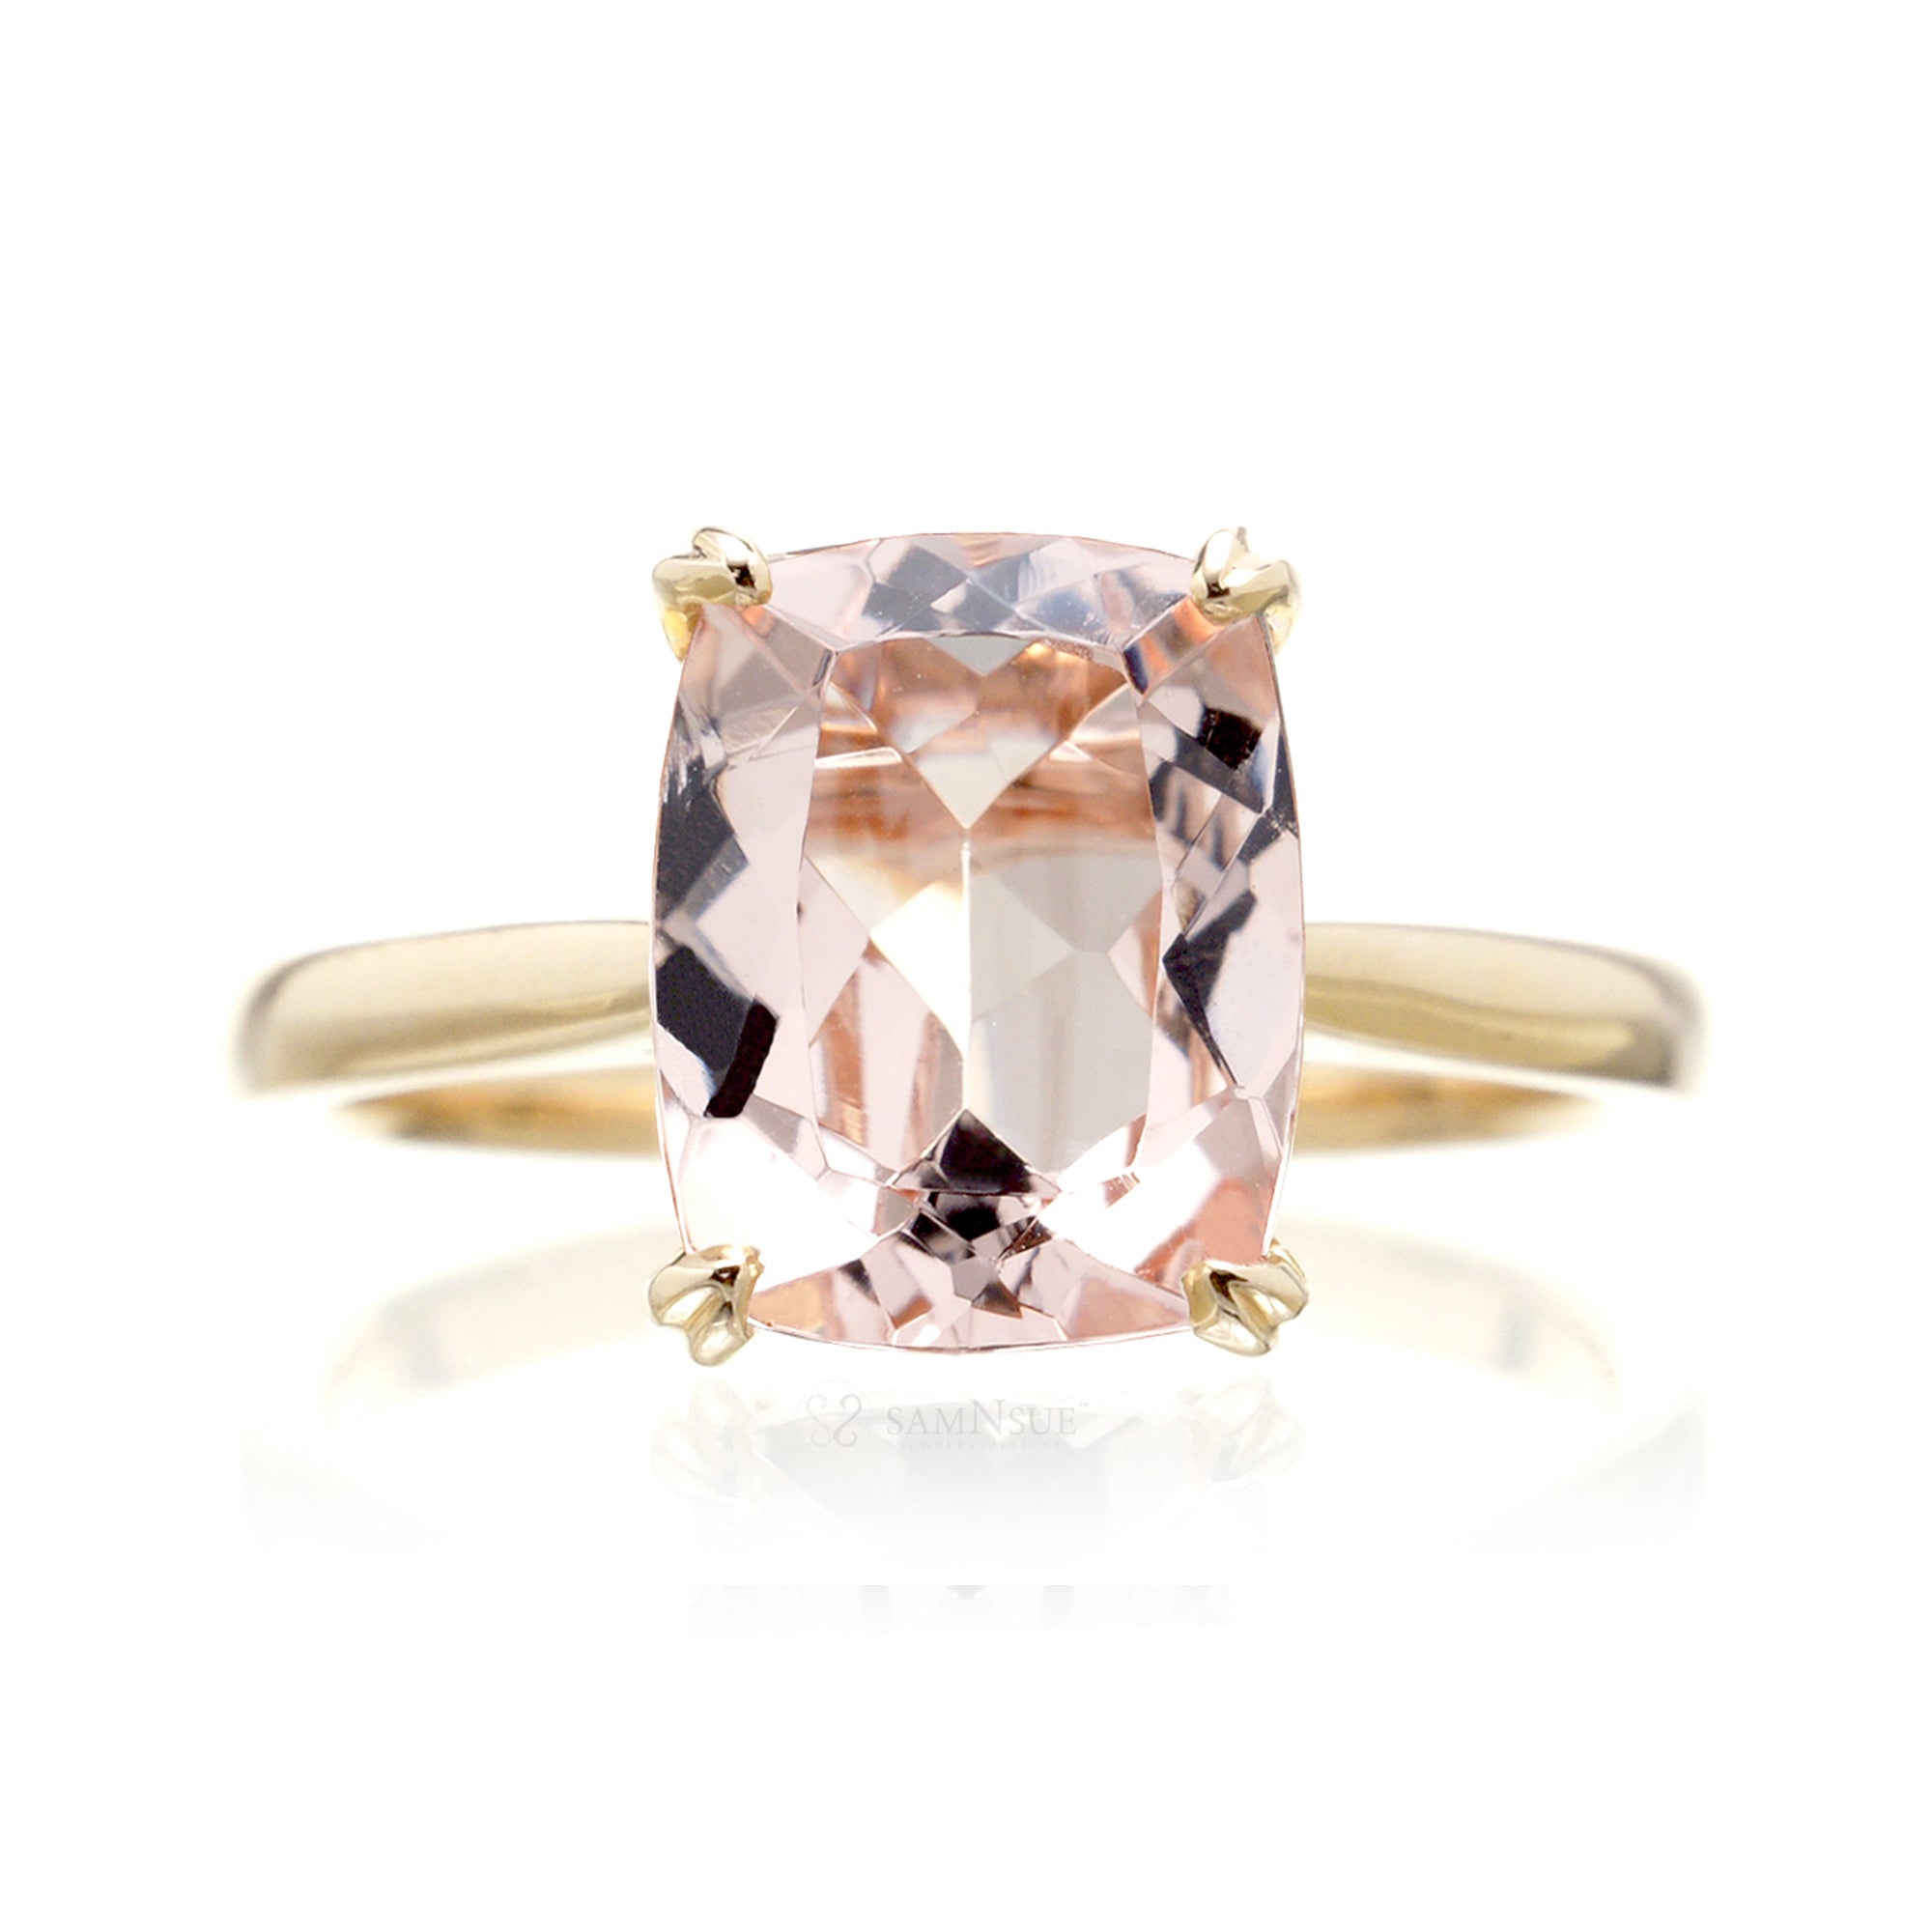 Cushion morganite solitaire engagement ring in yellow gold